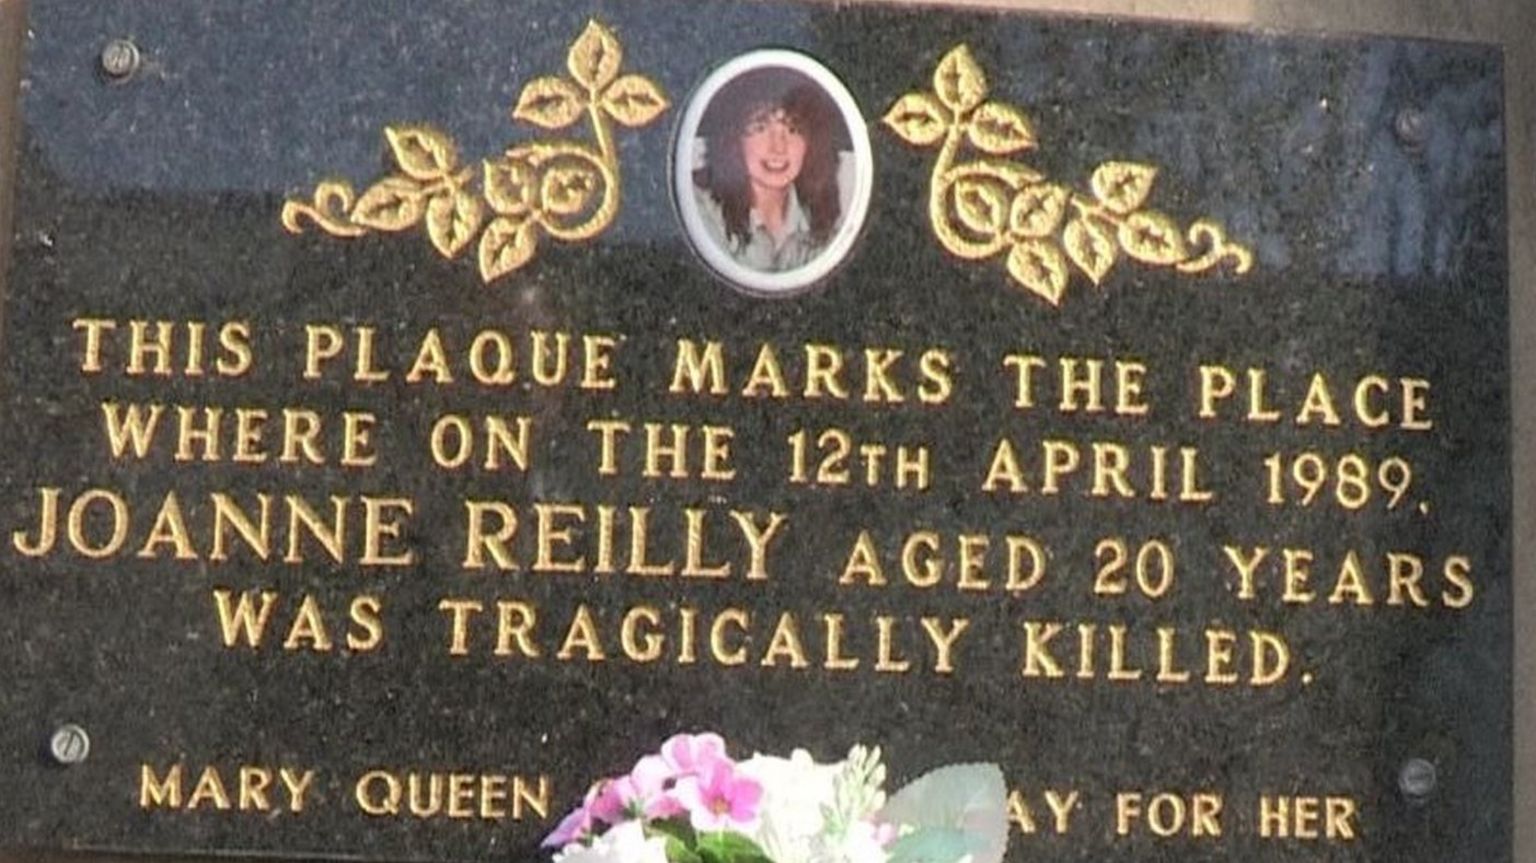 Memorial to Joanne Reilly